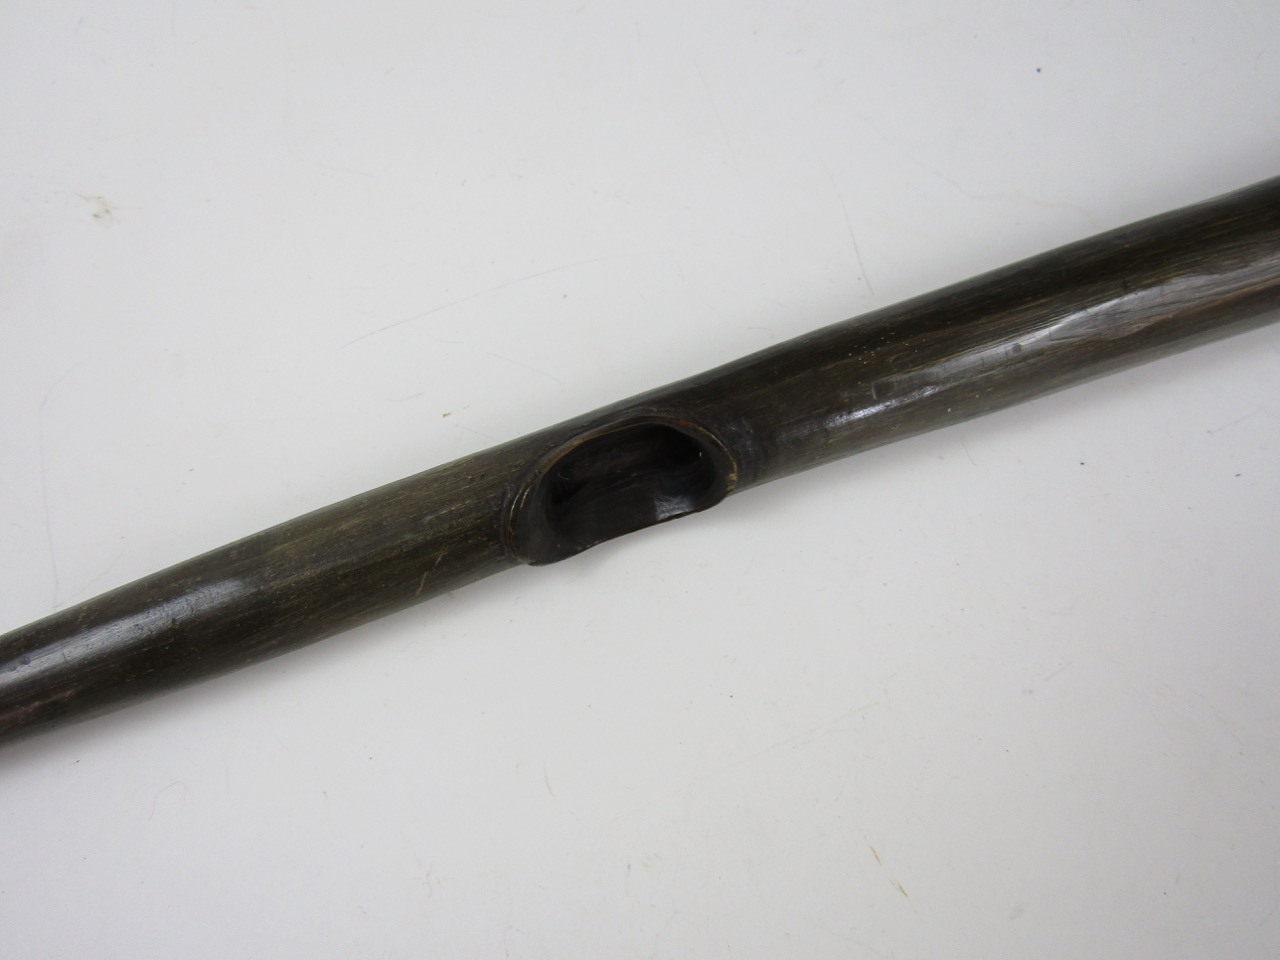 An antique African horn flute-like wind instrument, 76 cm - Image 2 of 3